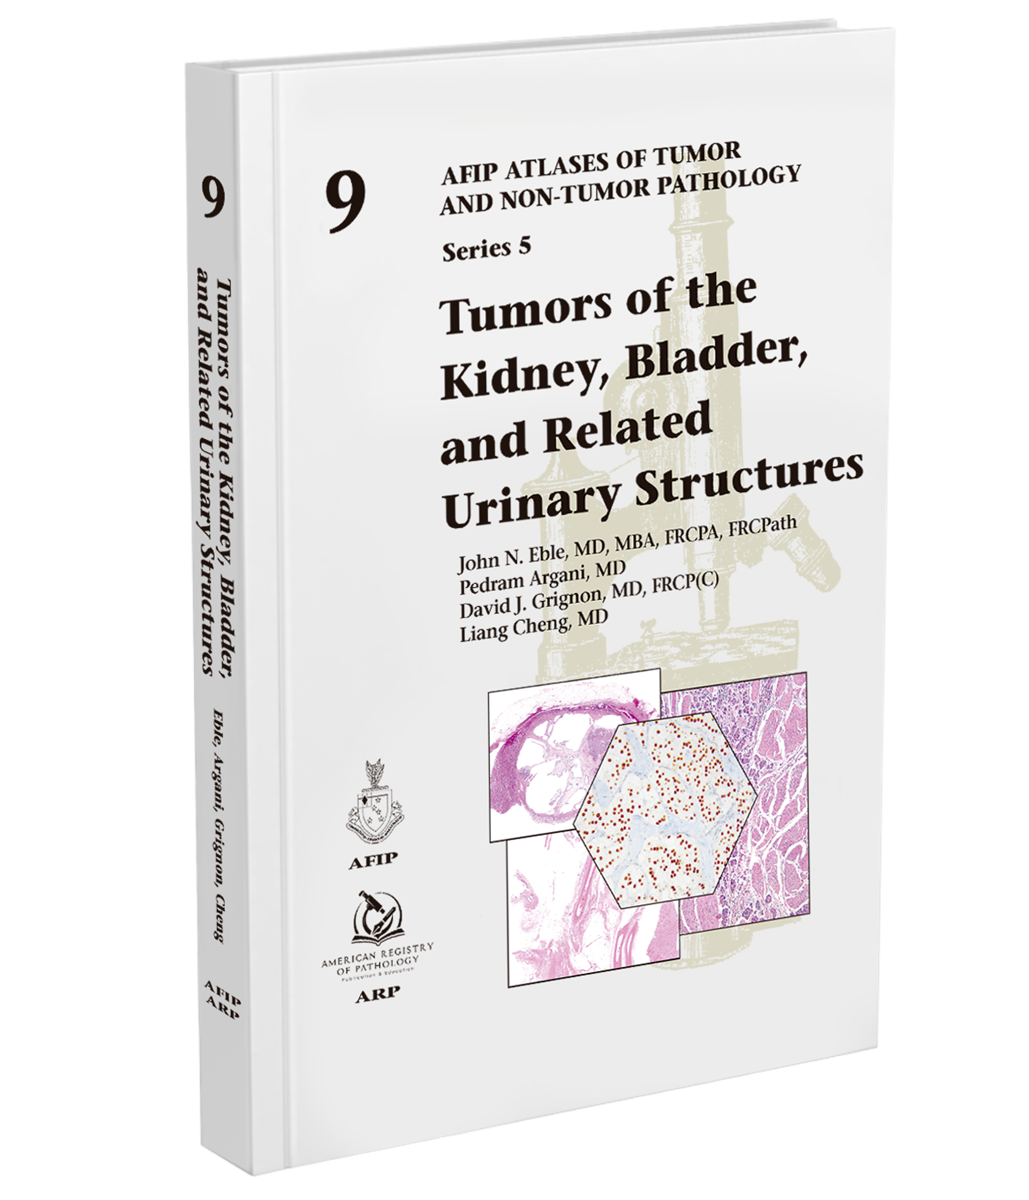 Atlases of Tumor & Non-Tumor Pathology, 5th Series,Fascicle 9- Tumors of Kidney, Bladder, & Related UrinaryStructures